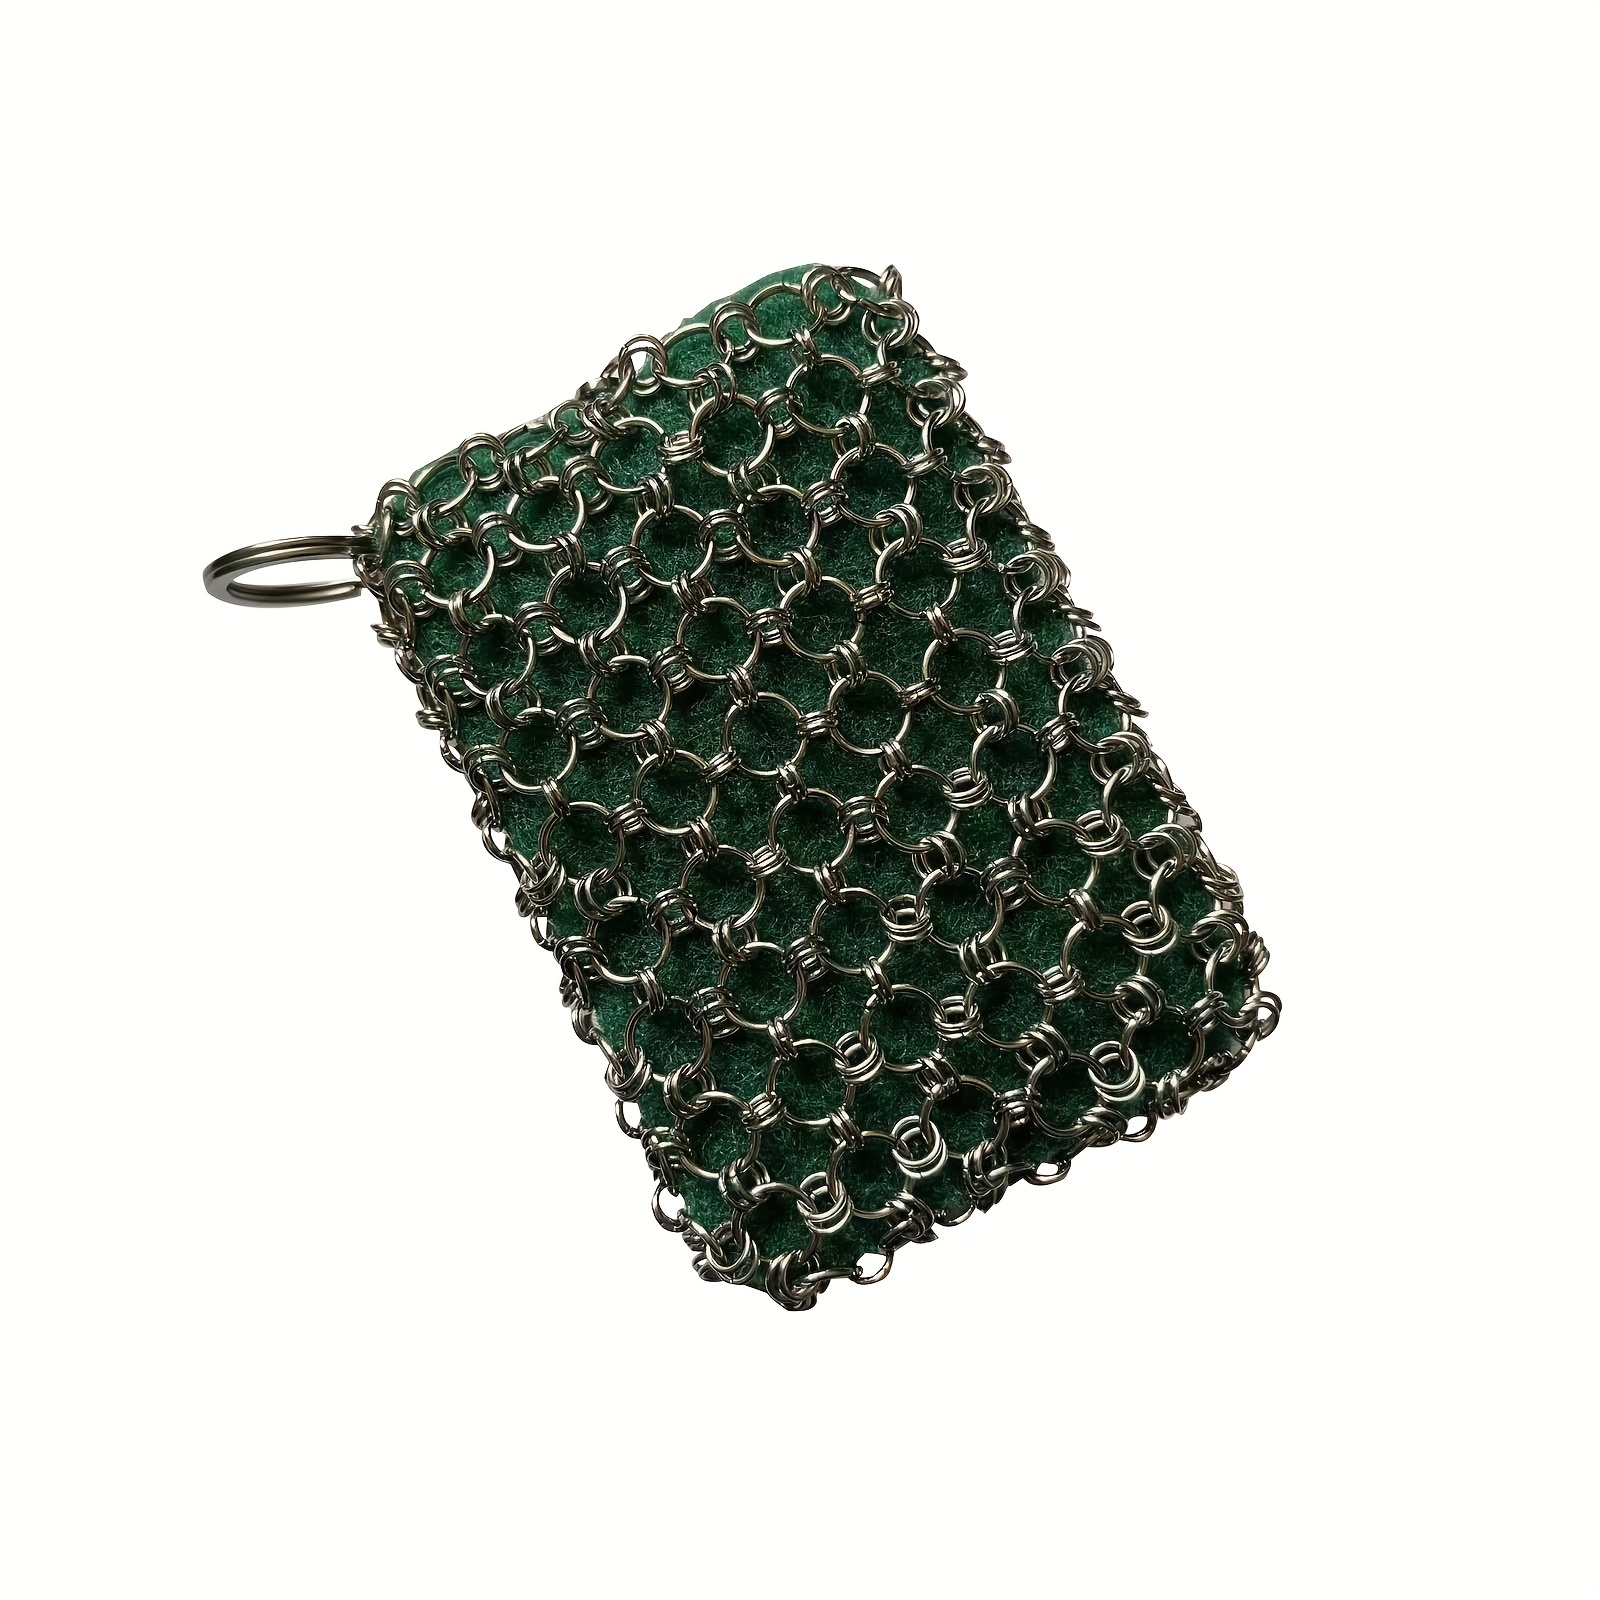 Most Flexible Cast Iron Scrubber, Chainmail Scrubber, Easy To